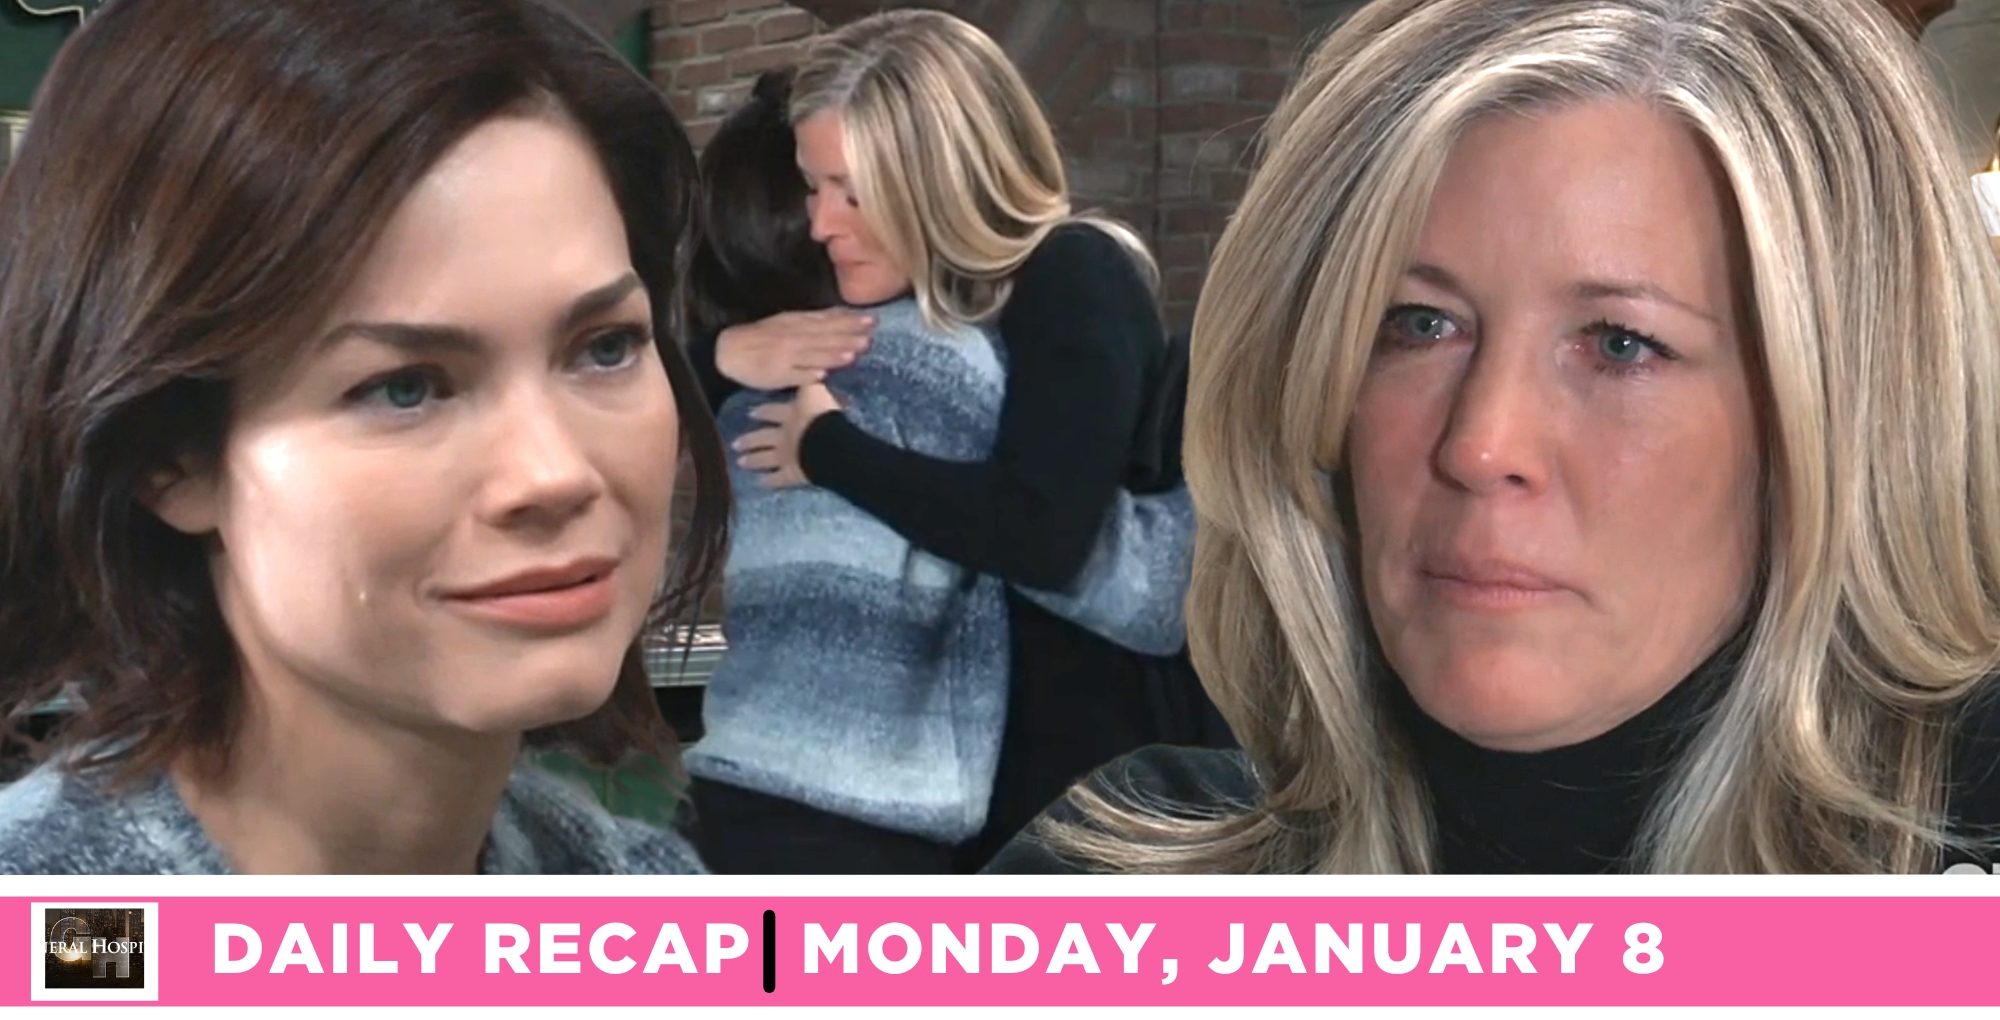 general hospital recap for Monday, January 8, 2024, featured liz webber and carly corinthos hugging.